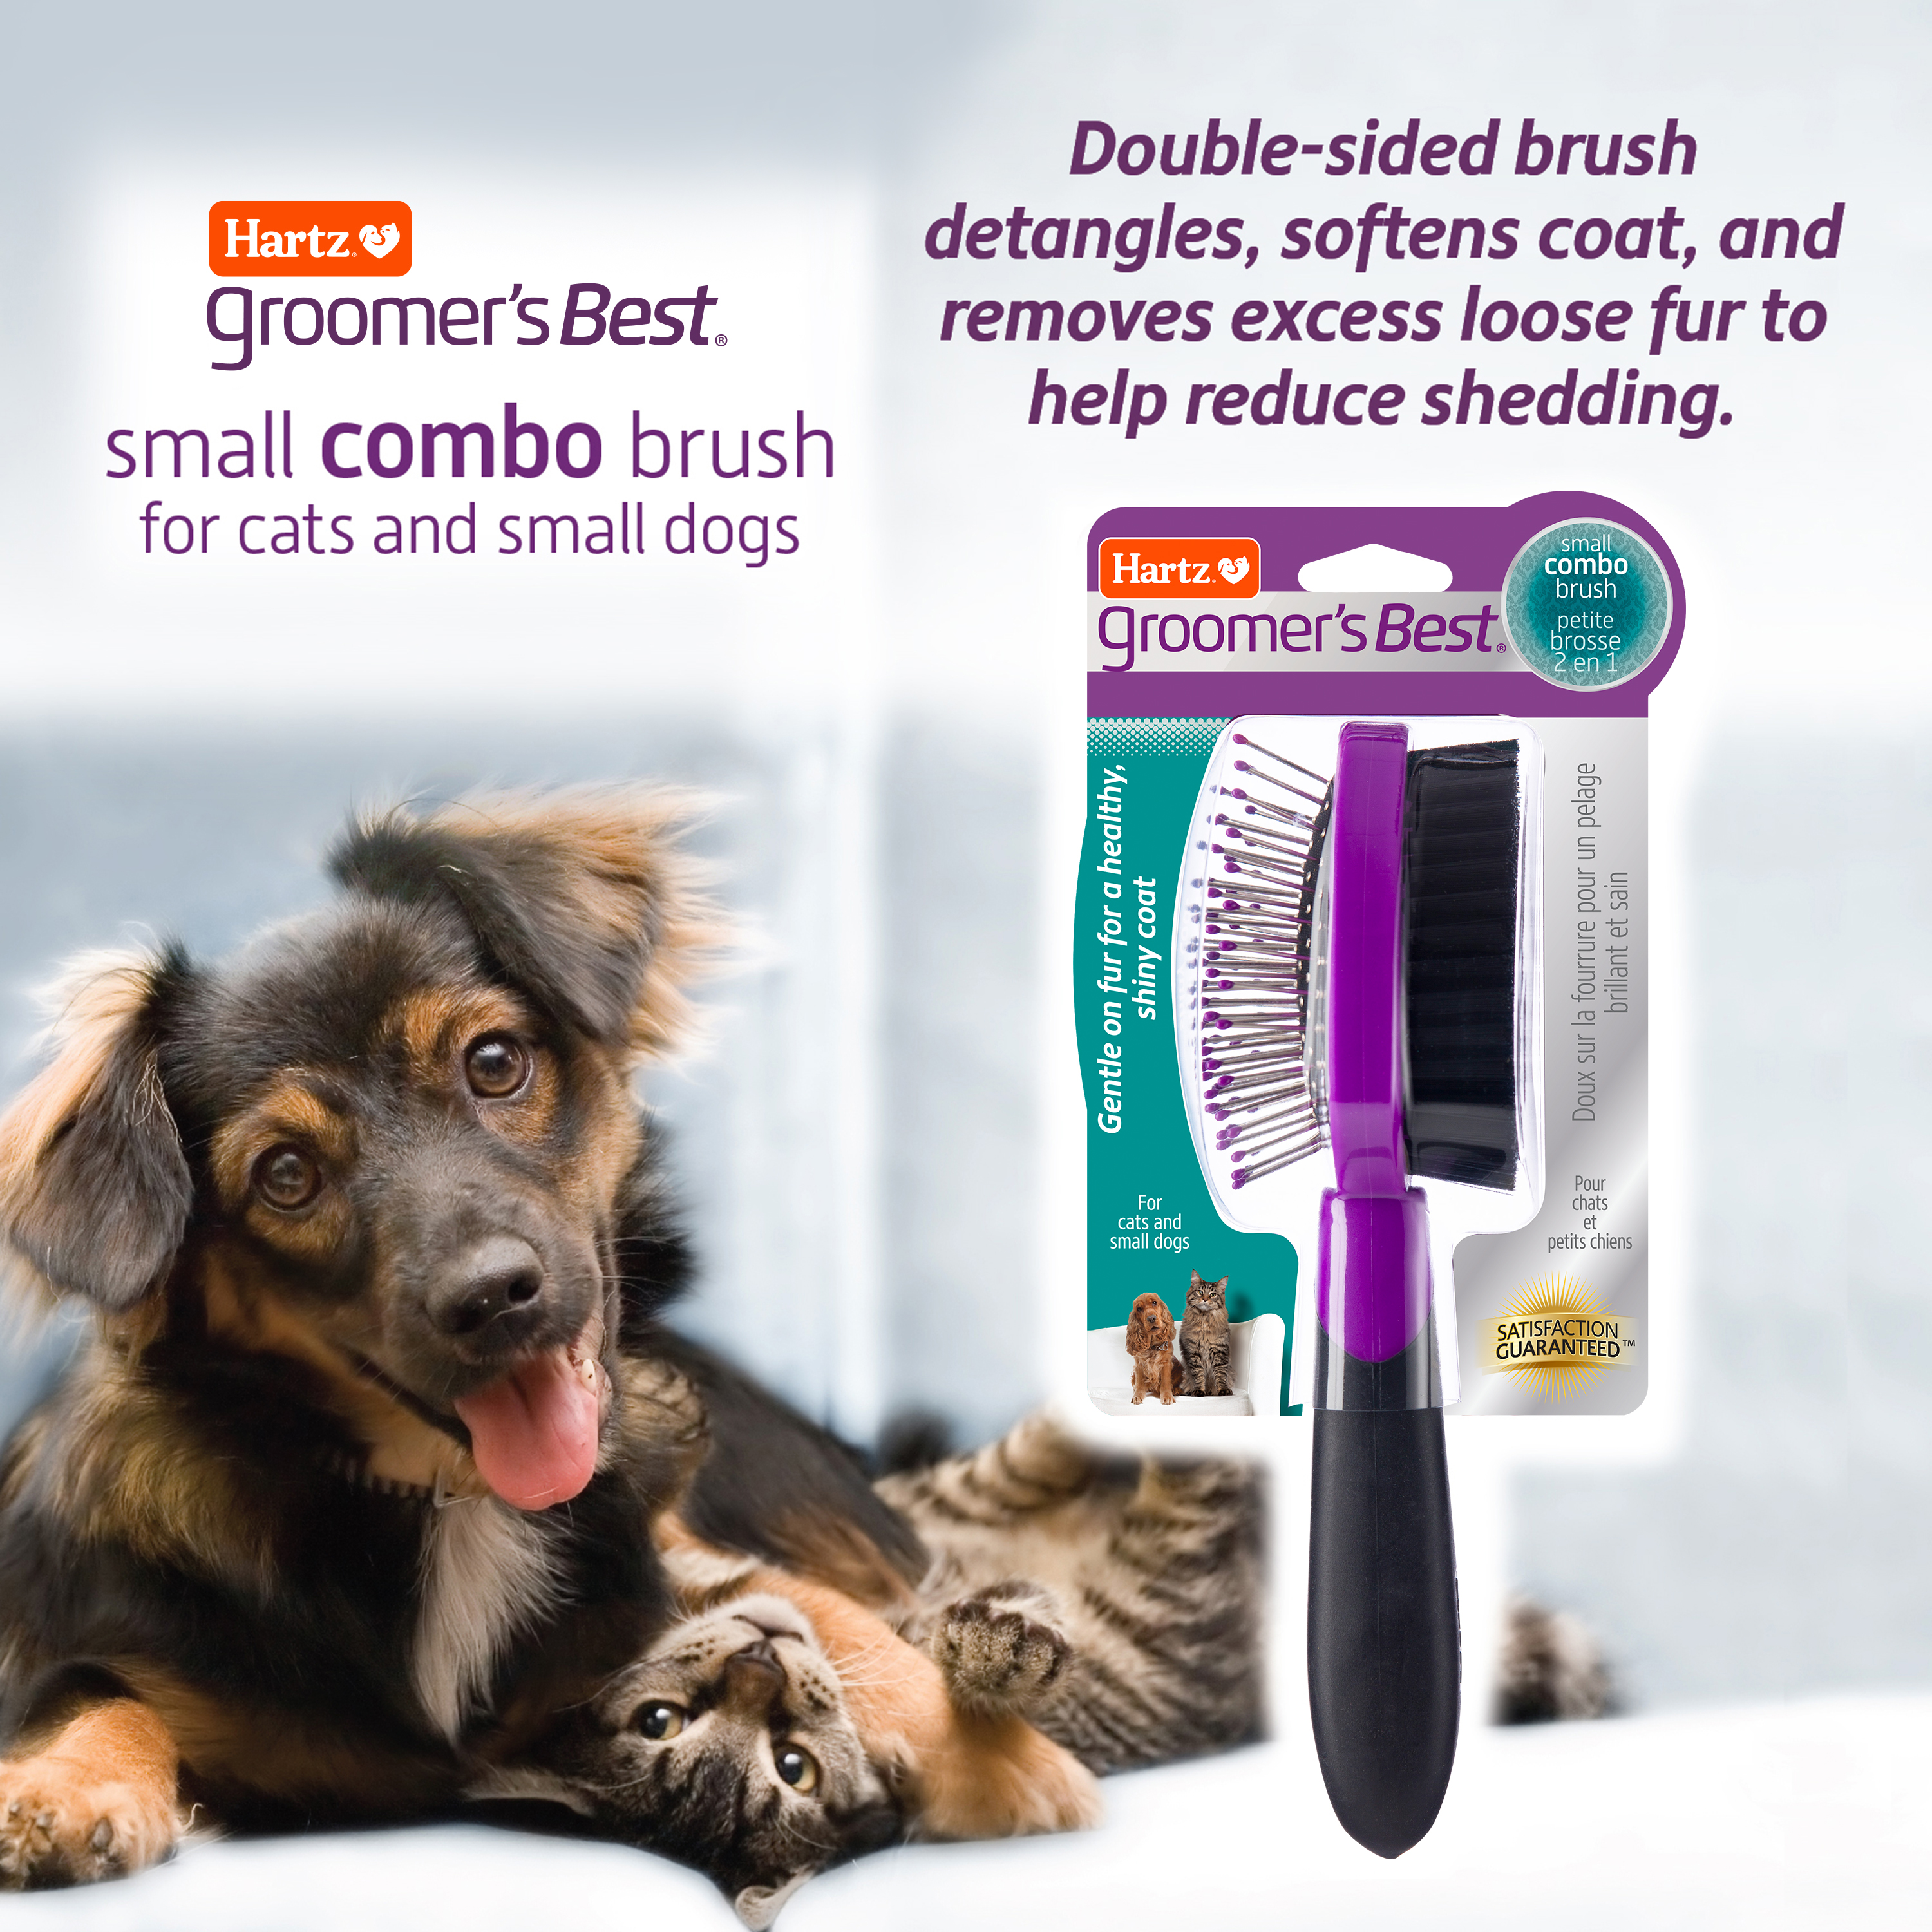 Hartz Groomer's Best Combo Grooming Brush for Cats and Small Dogs - image 5 of 8